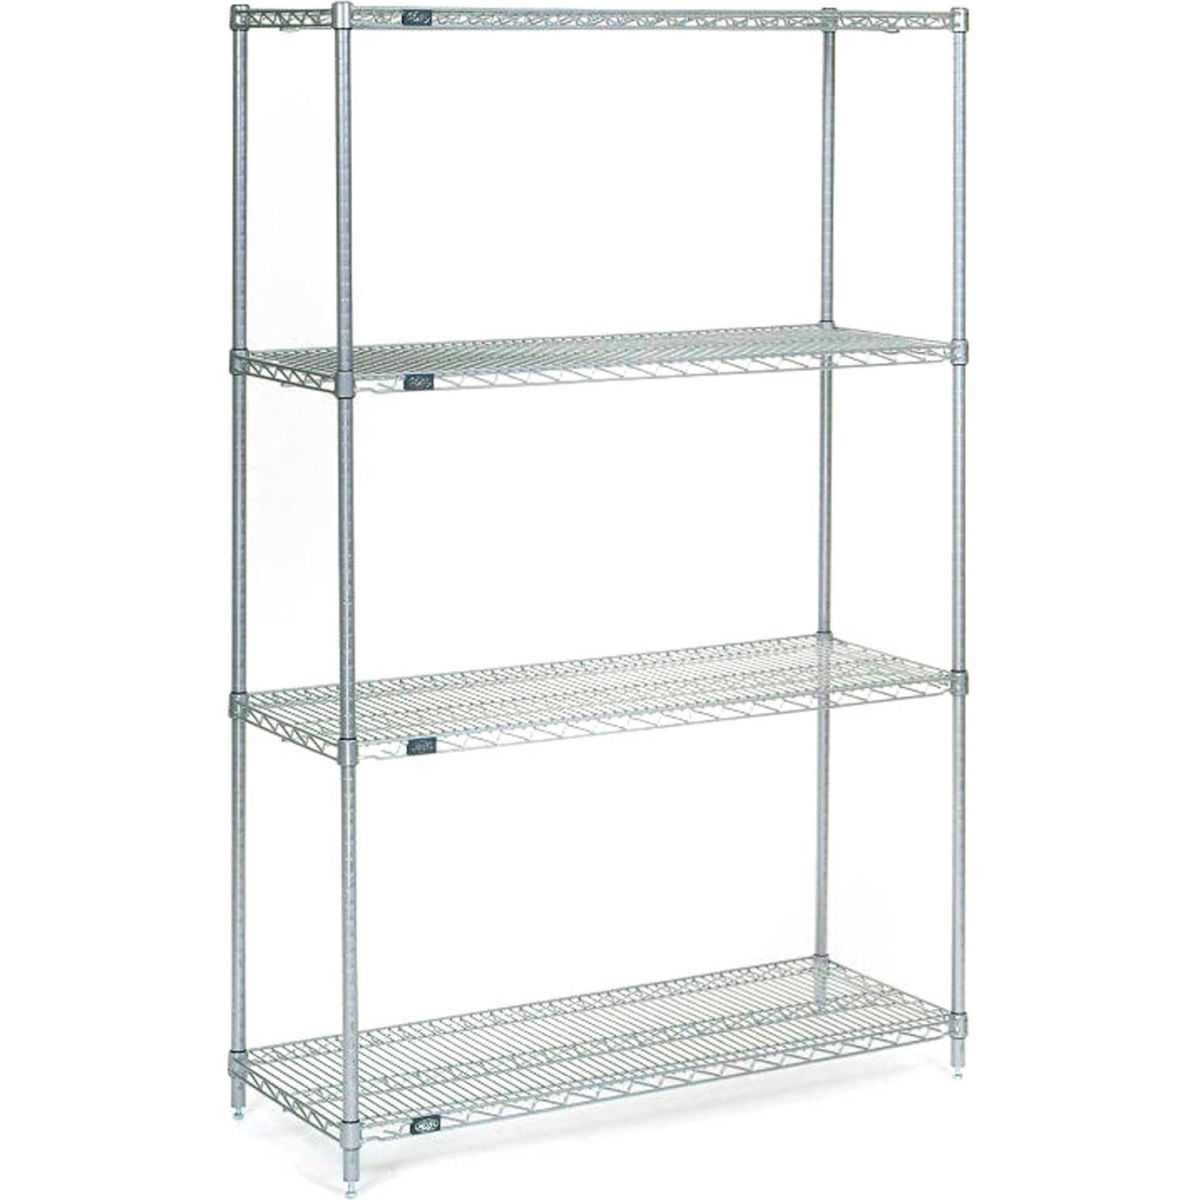 Picture of Global Industrial 14307S 74 x 30 x 14 in. Nexel Stainless Steel Starter Wire Shelving